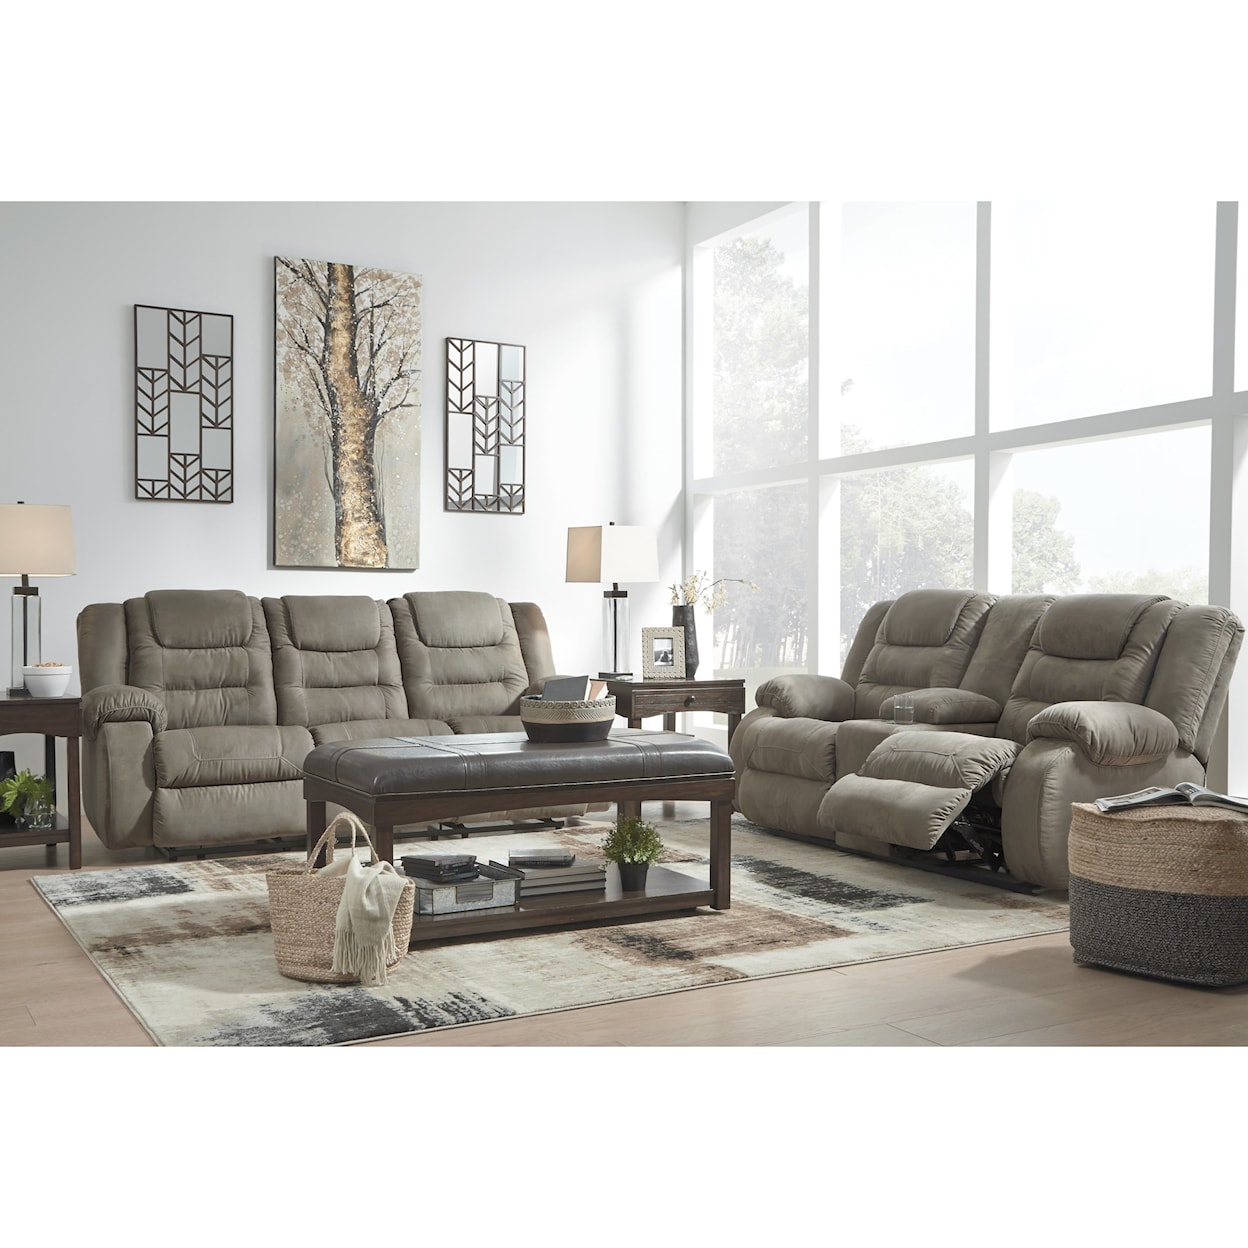 Signature Design by Ashley McCade Reclining Living Room Group